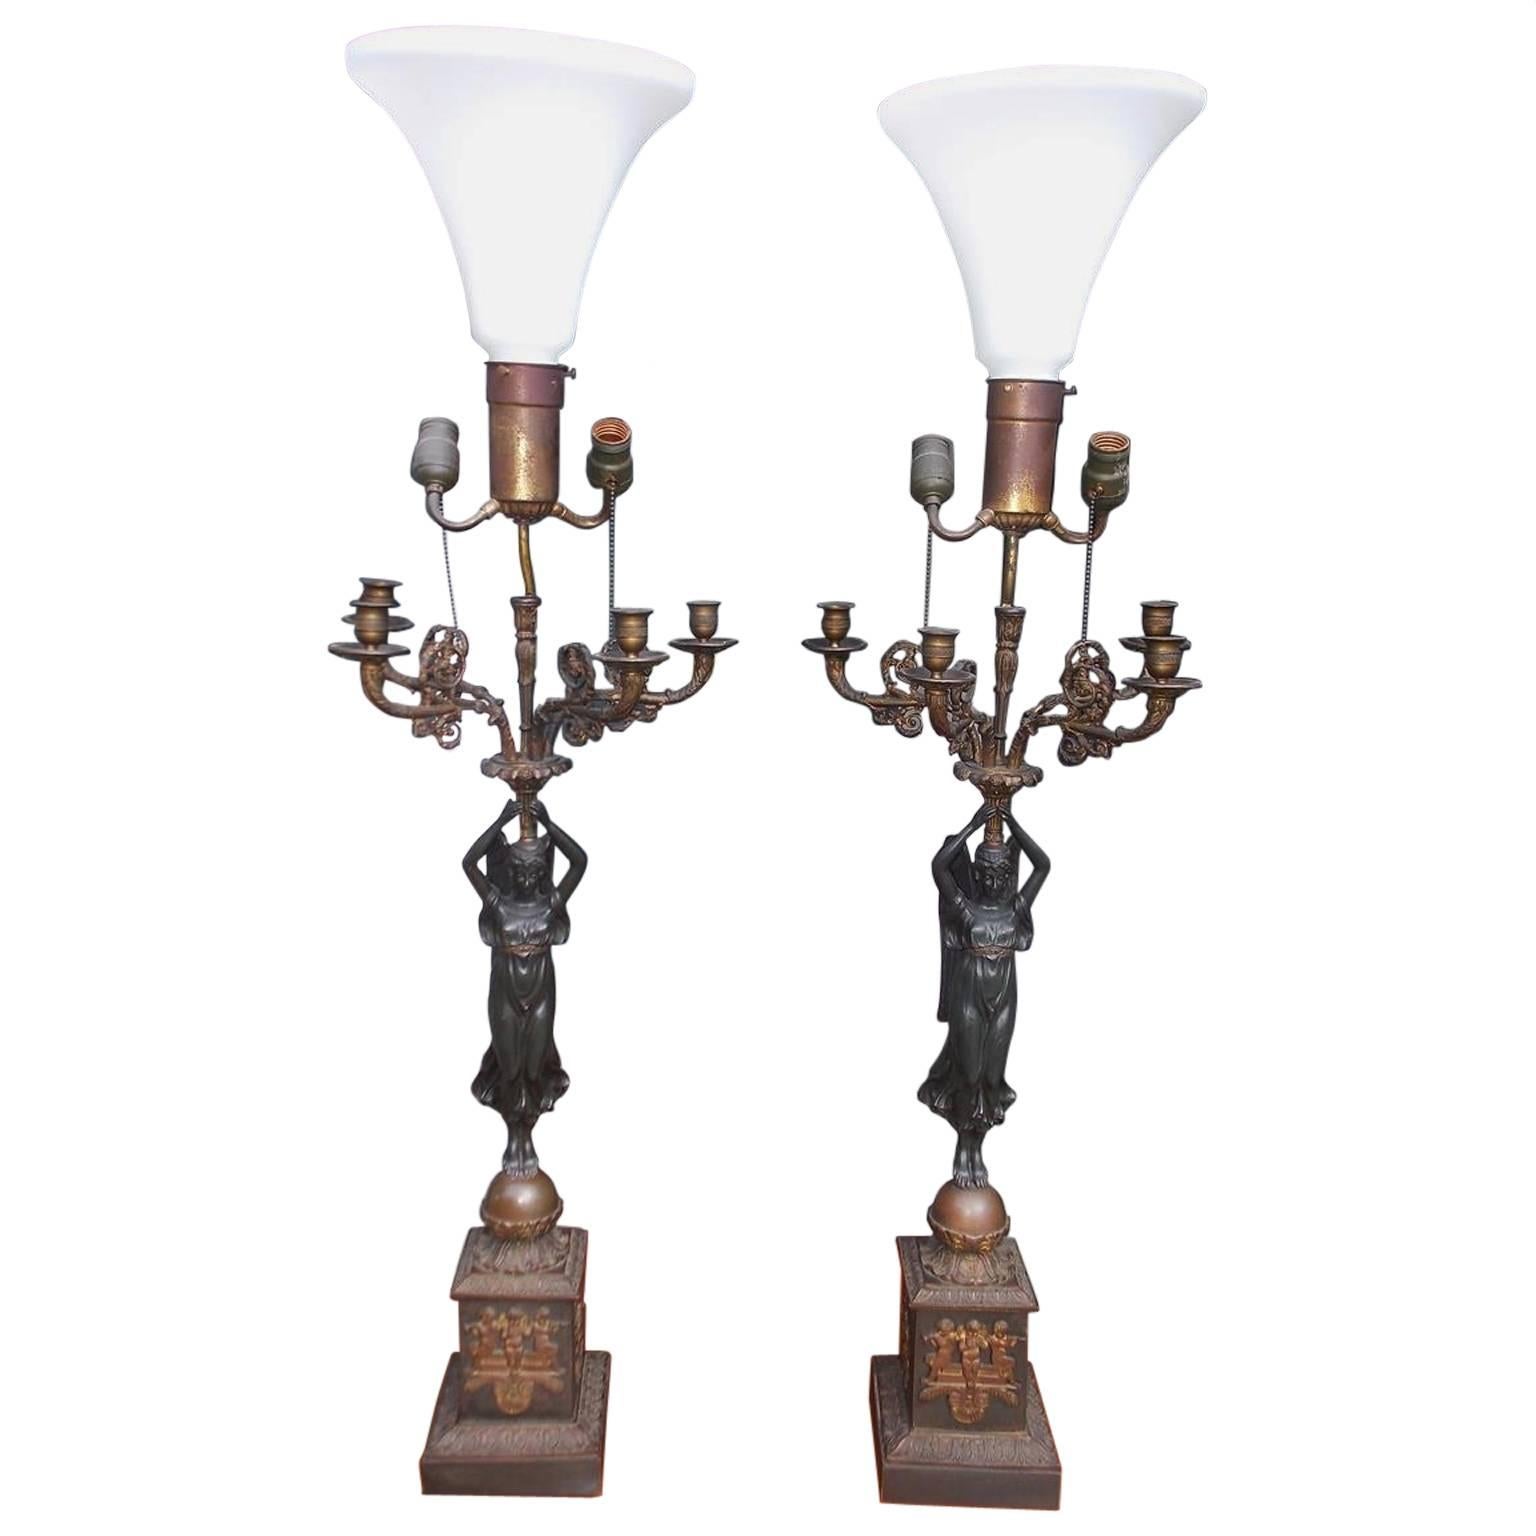 Pair of French Gilt Bronze Angelic Figural Candelabras, Circa 1820 For Sale